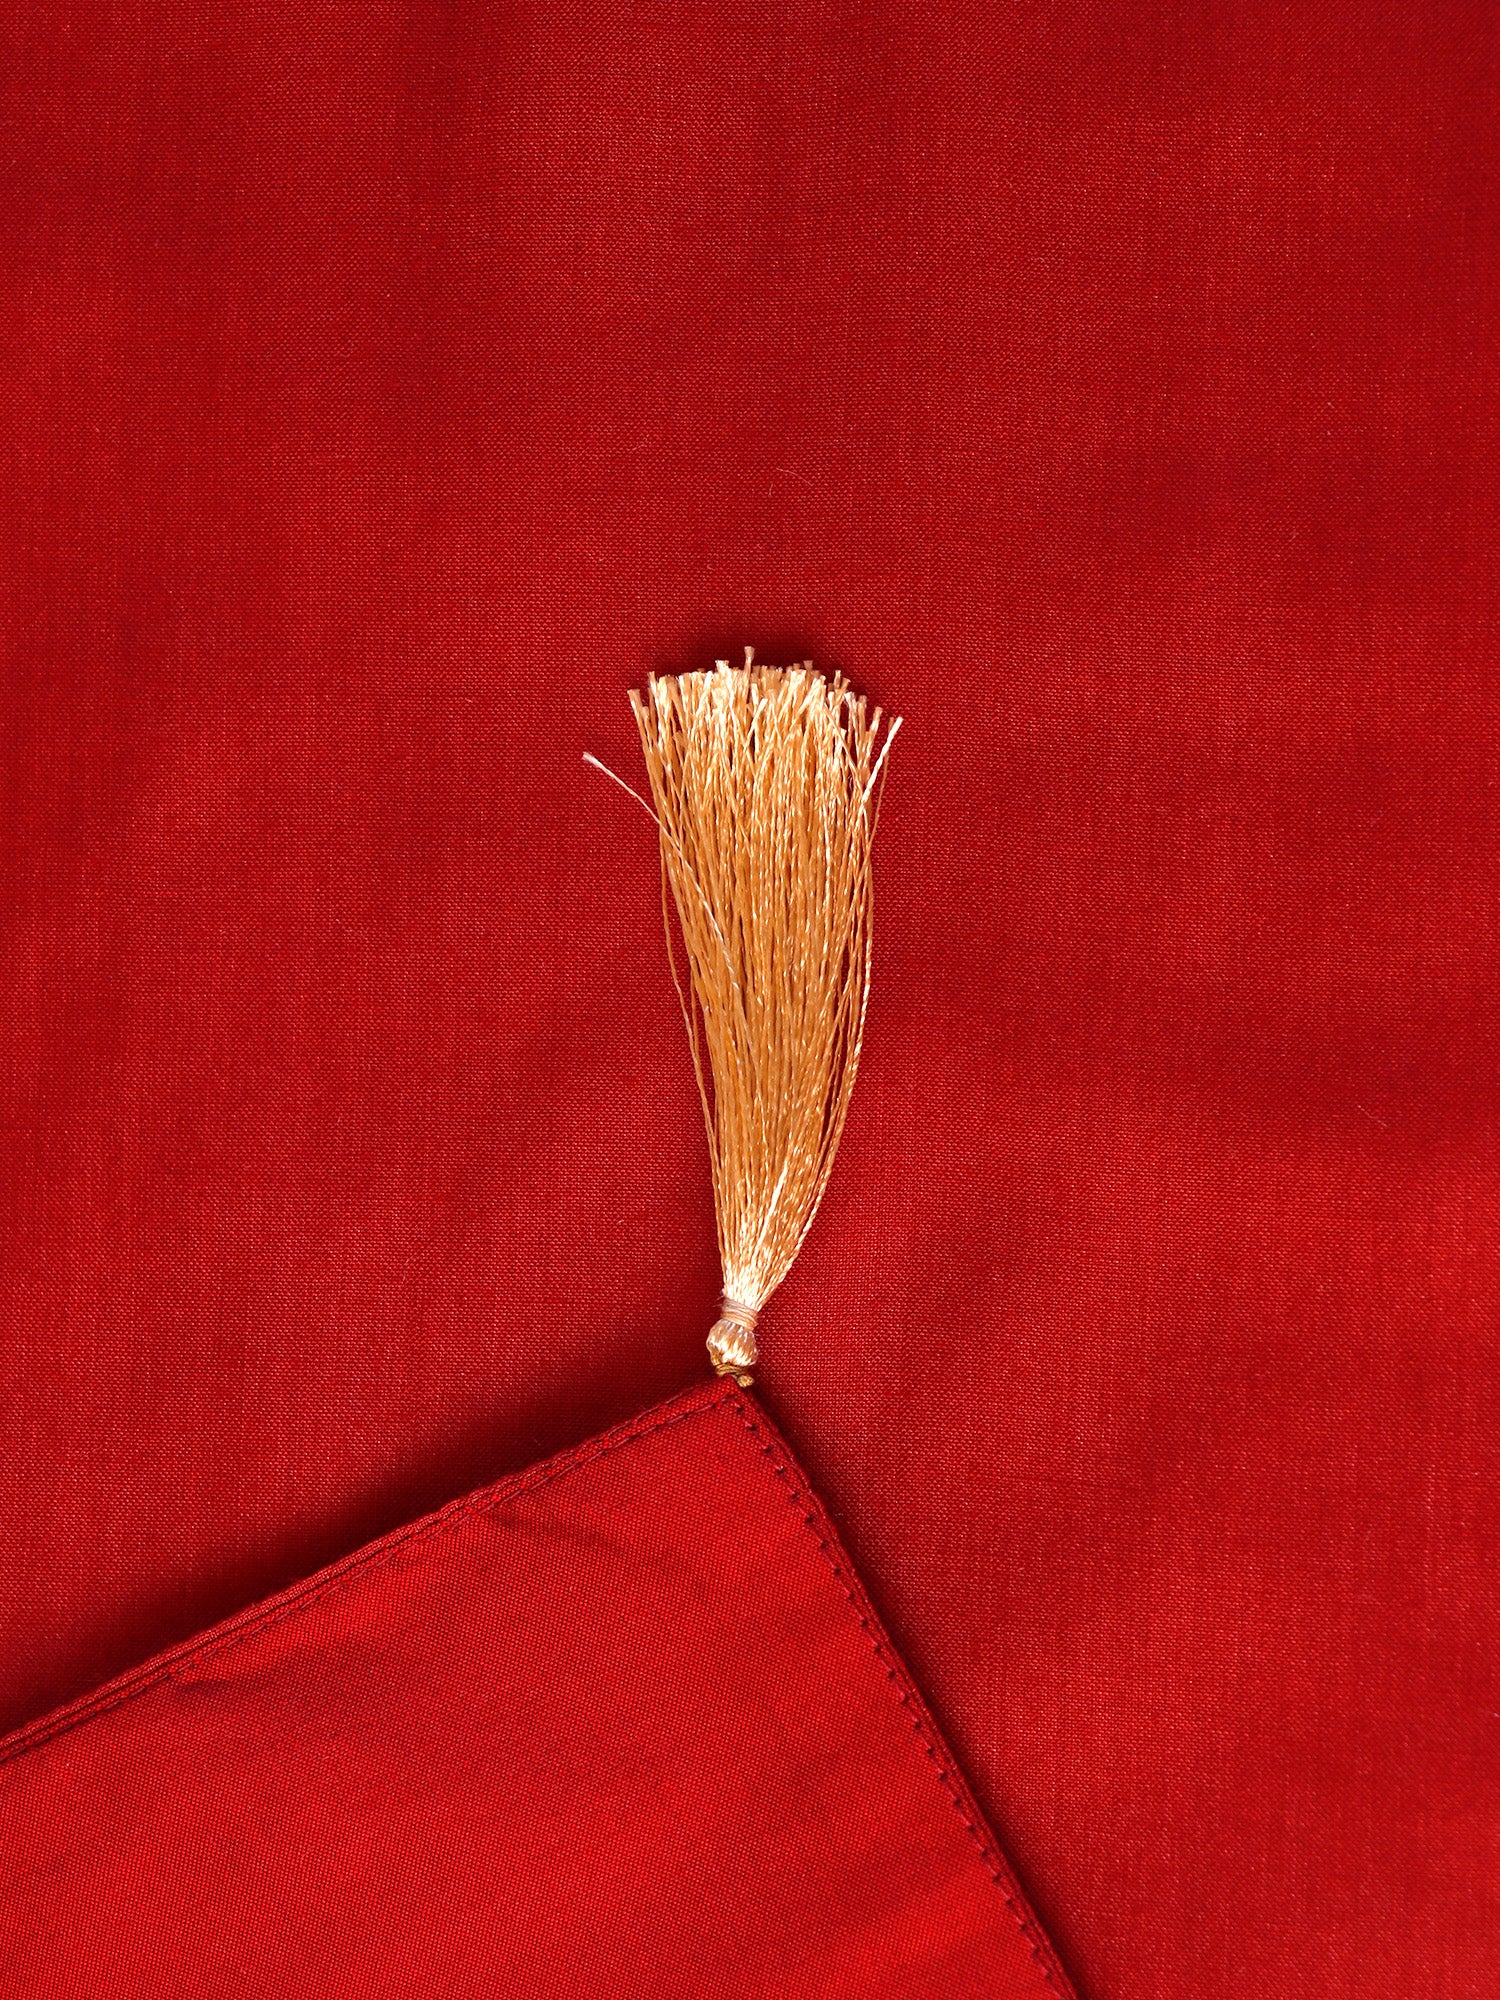 closeup of tassels on red colored embroidered table runner